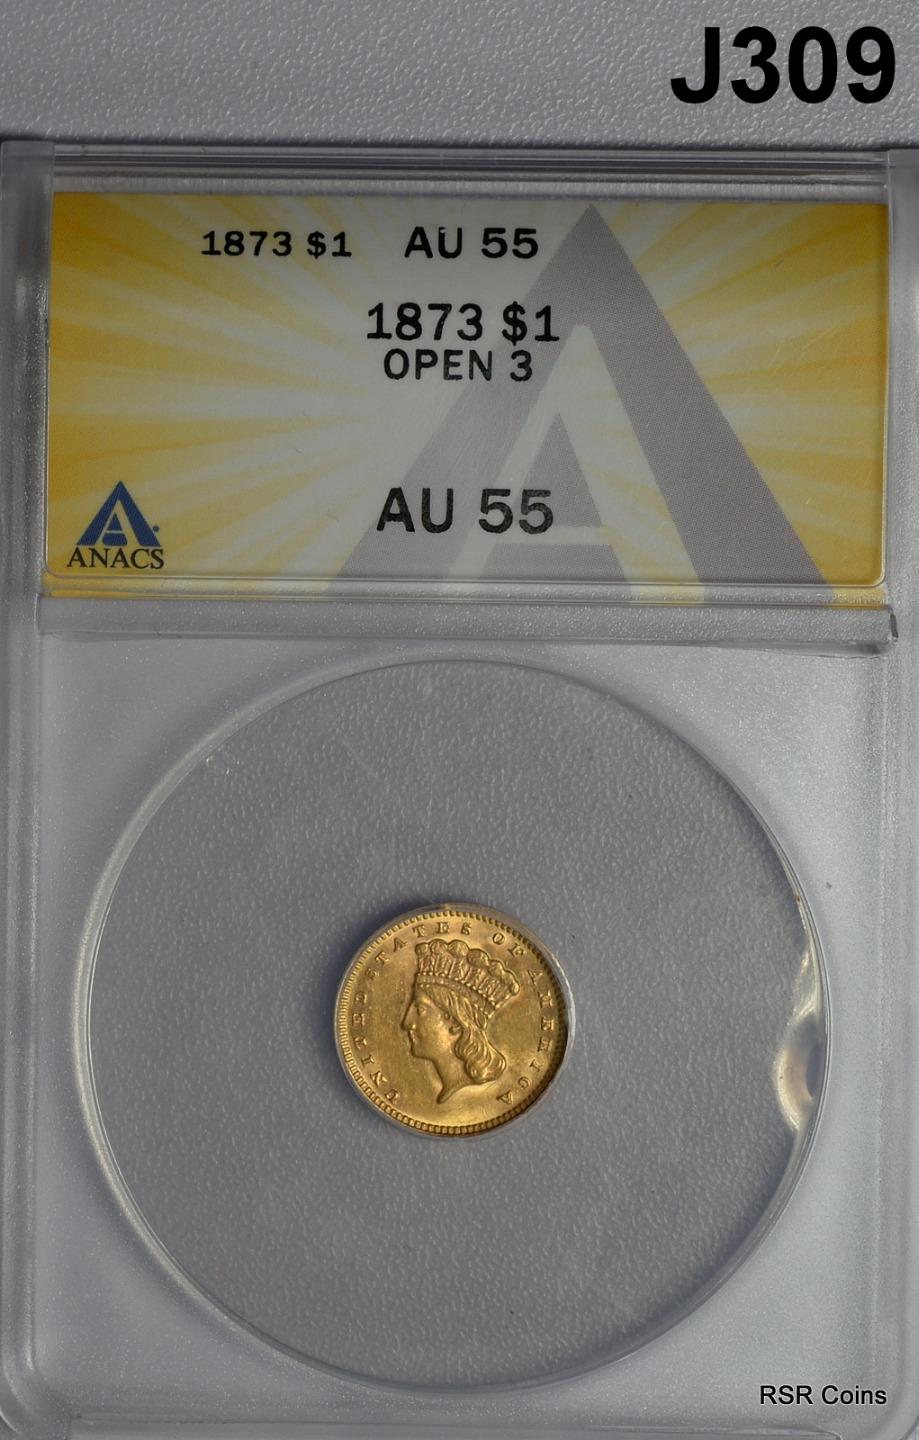 1873 OPEN 3 INDIAN PRINCESS $1.00 GOLD PIECE ANACS CERTIFED AU55 WOW! #J309